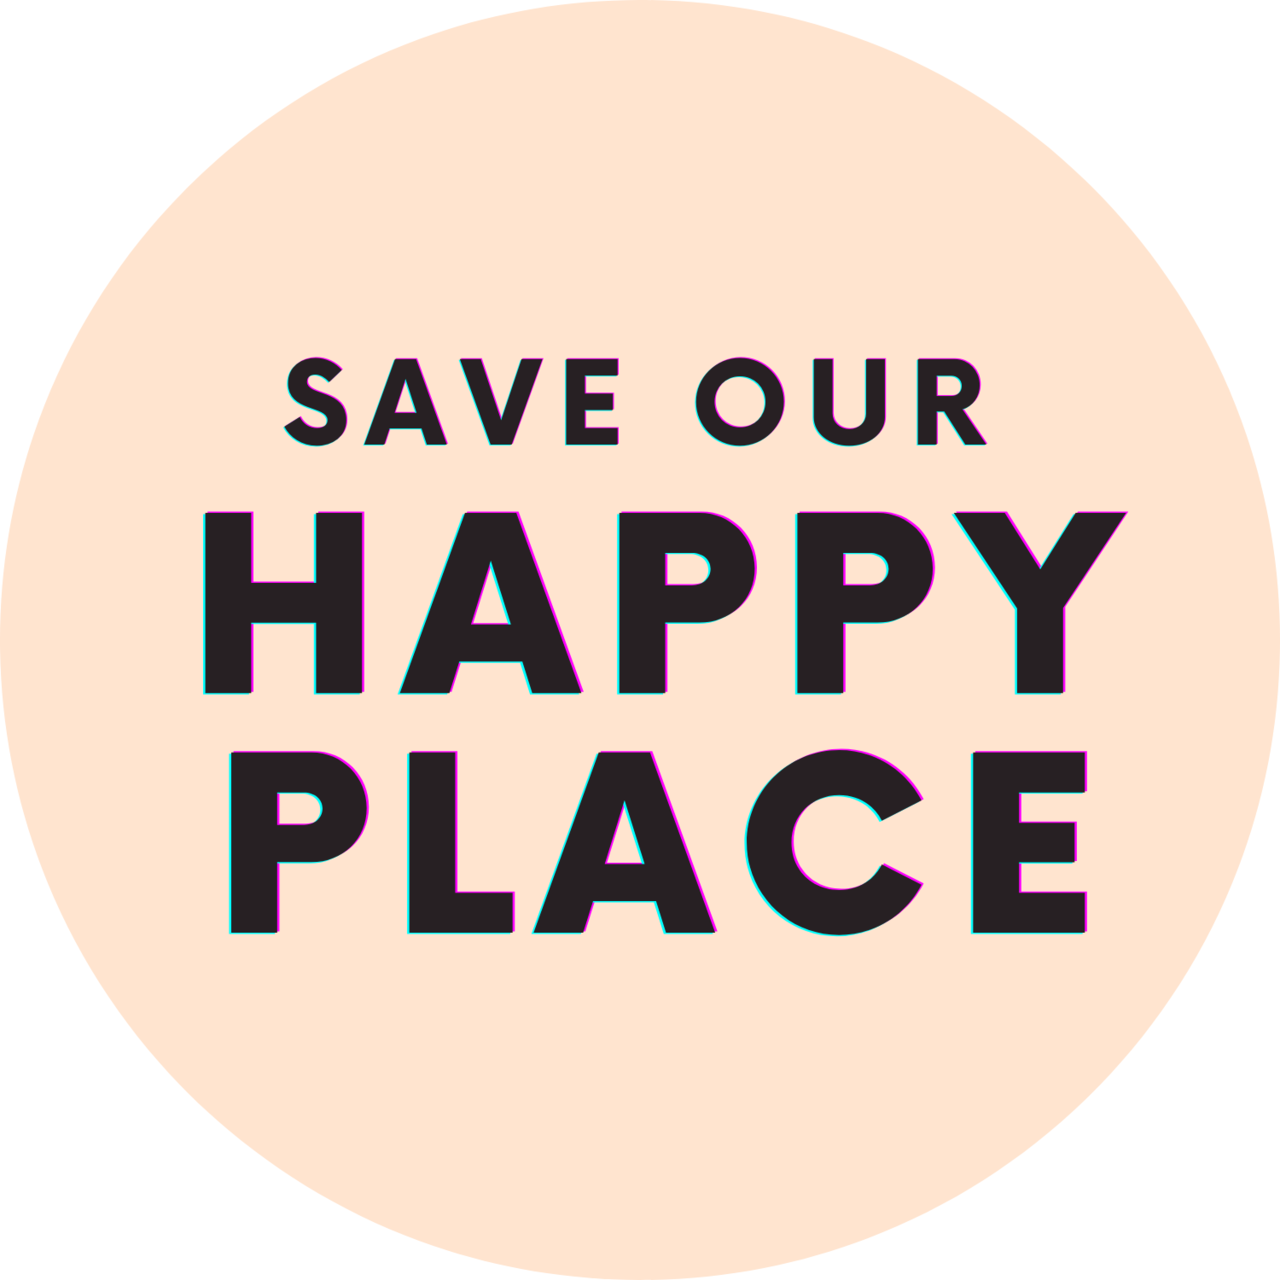 Artwork for Save Our Happy Place